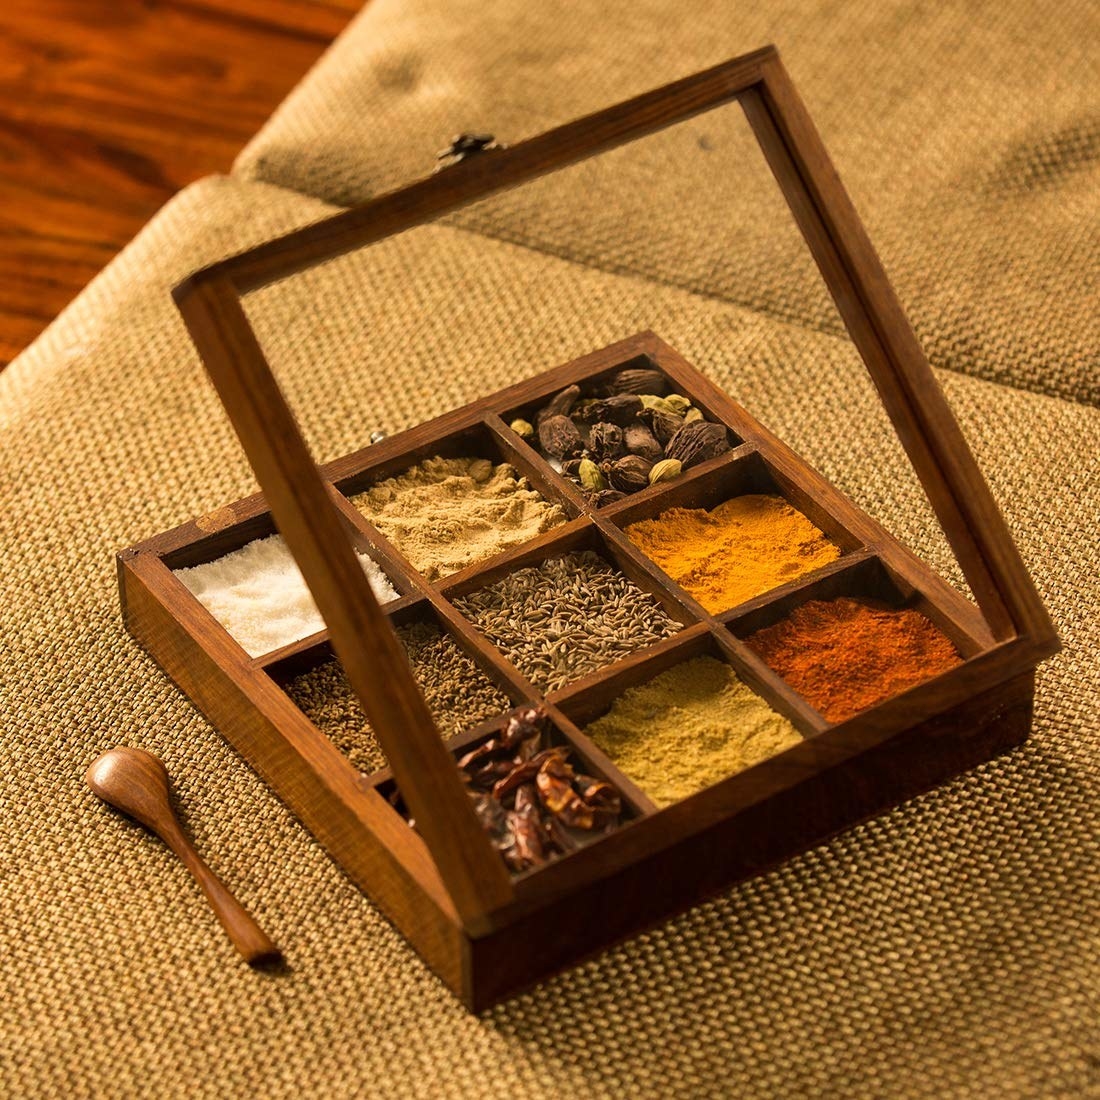 A Sheesham wood masala box with spices in it and a spoon beside it